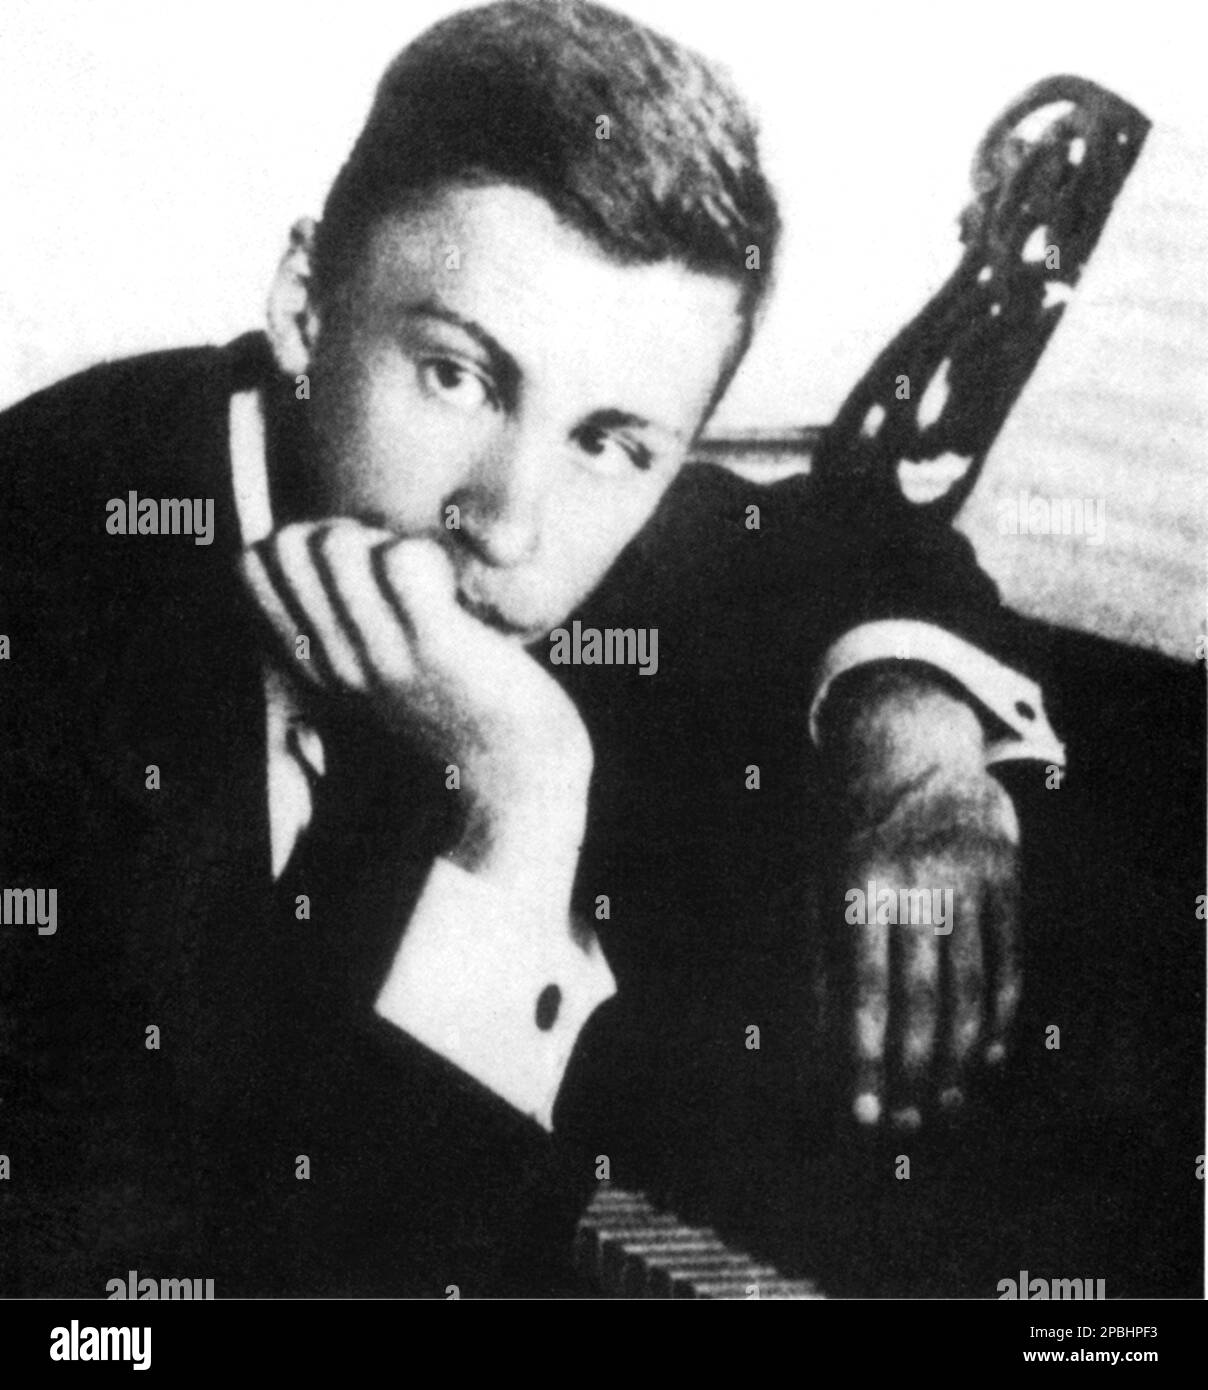 1910 ca : The russian music composer SERGEJ PROKOFIEV ( Sergej Sergeevic Prokof'ev,  1891 - 1953 ) , was a Russian composer who mastered numerous musical genres and came to be admired as one of the greatest composers of the 20th century - Sergej Sergejevic  Prokofjev , Sergei , Sergey or Serge  and Prokofief  Prokof'ev  Prokofiev  Prokoviev Prokofieff - BALLETS RUSSES by DIAGHILEV - Diagilev - COMPOSITORE - OPERA LIRICA - CLASSICA - CLASSICAL - PORTRAIT - RITRATTO - MUSICISTA - MUSICA  - pianist - pianista - AVANGUARDIA - AVANTGARDE ---- ARCHIVIO GBB Stock Photo